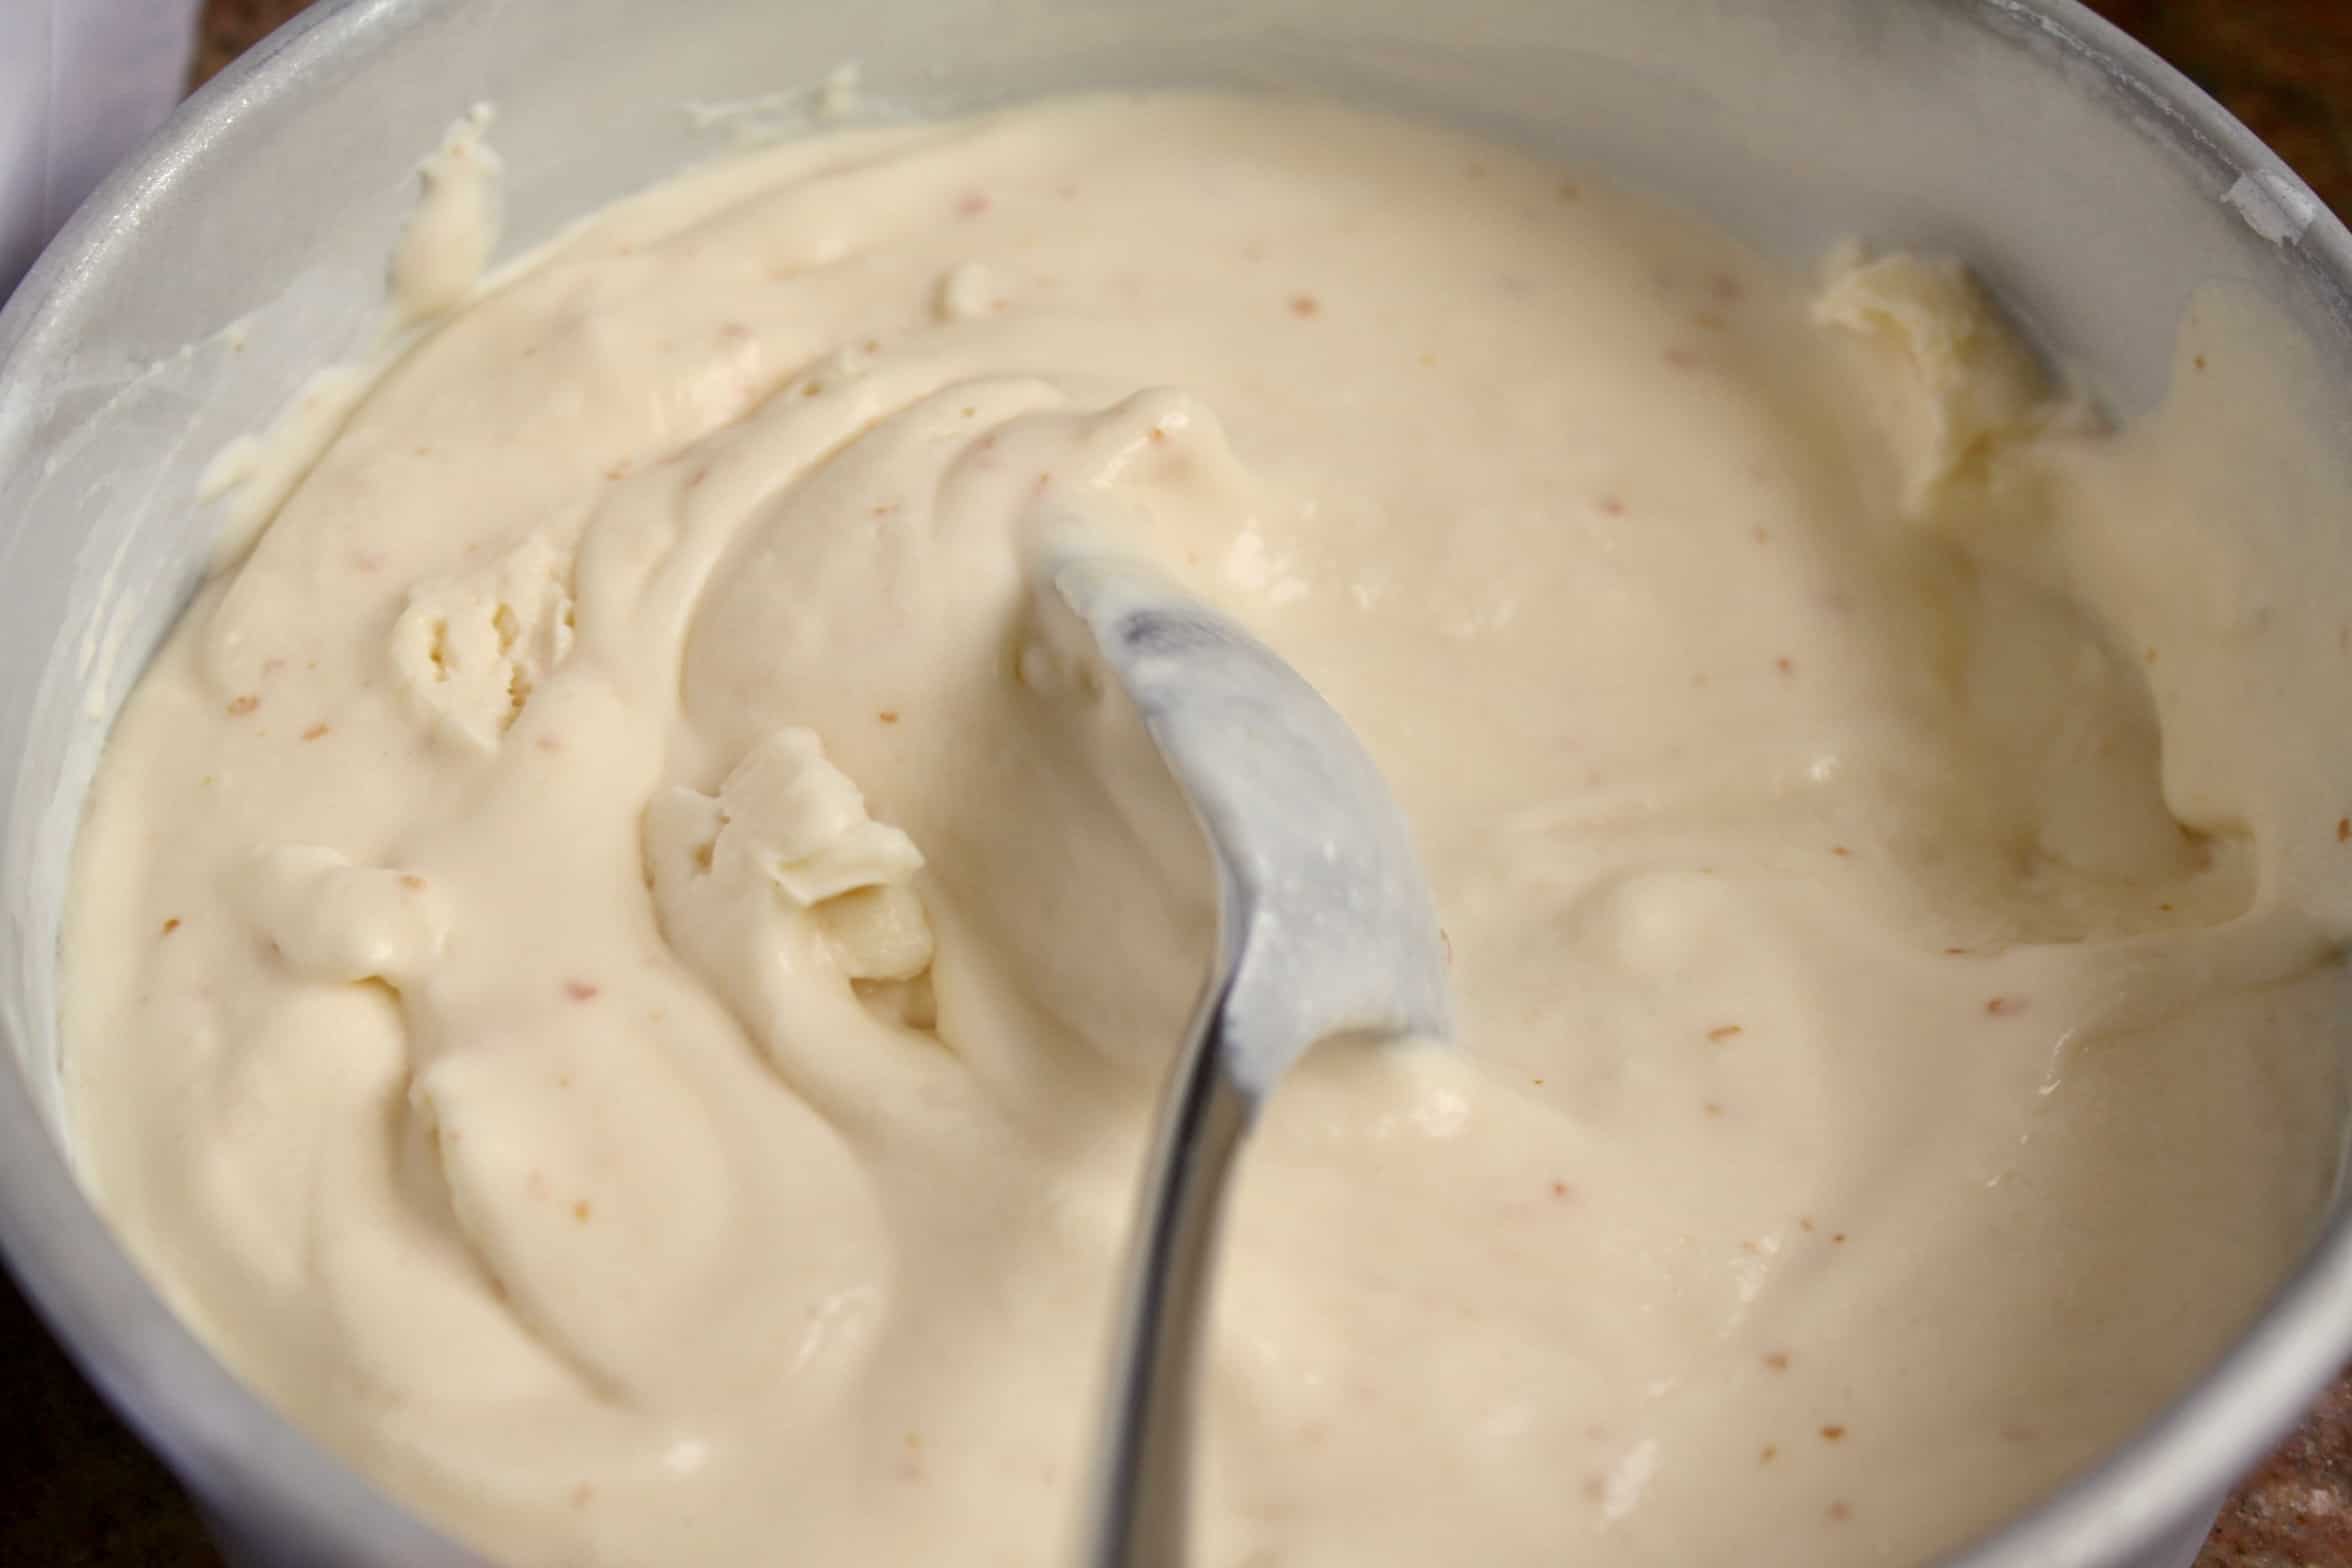 mixing the partially frozen orange cream mixture with a spoon